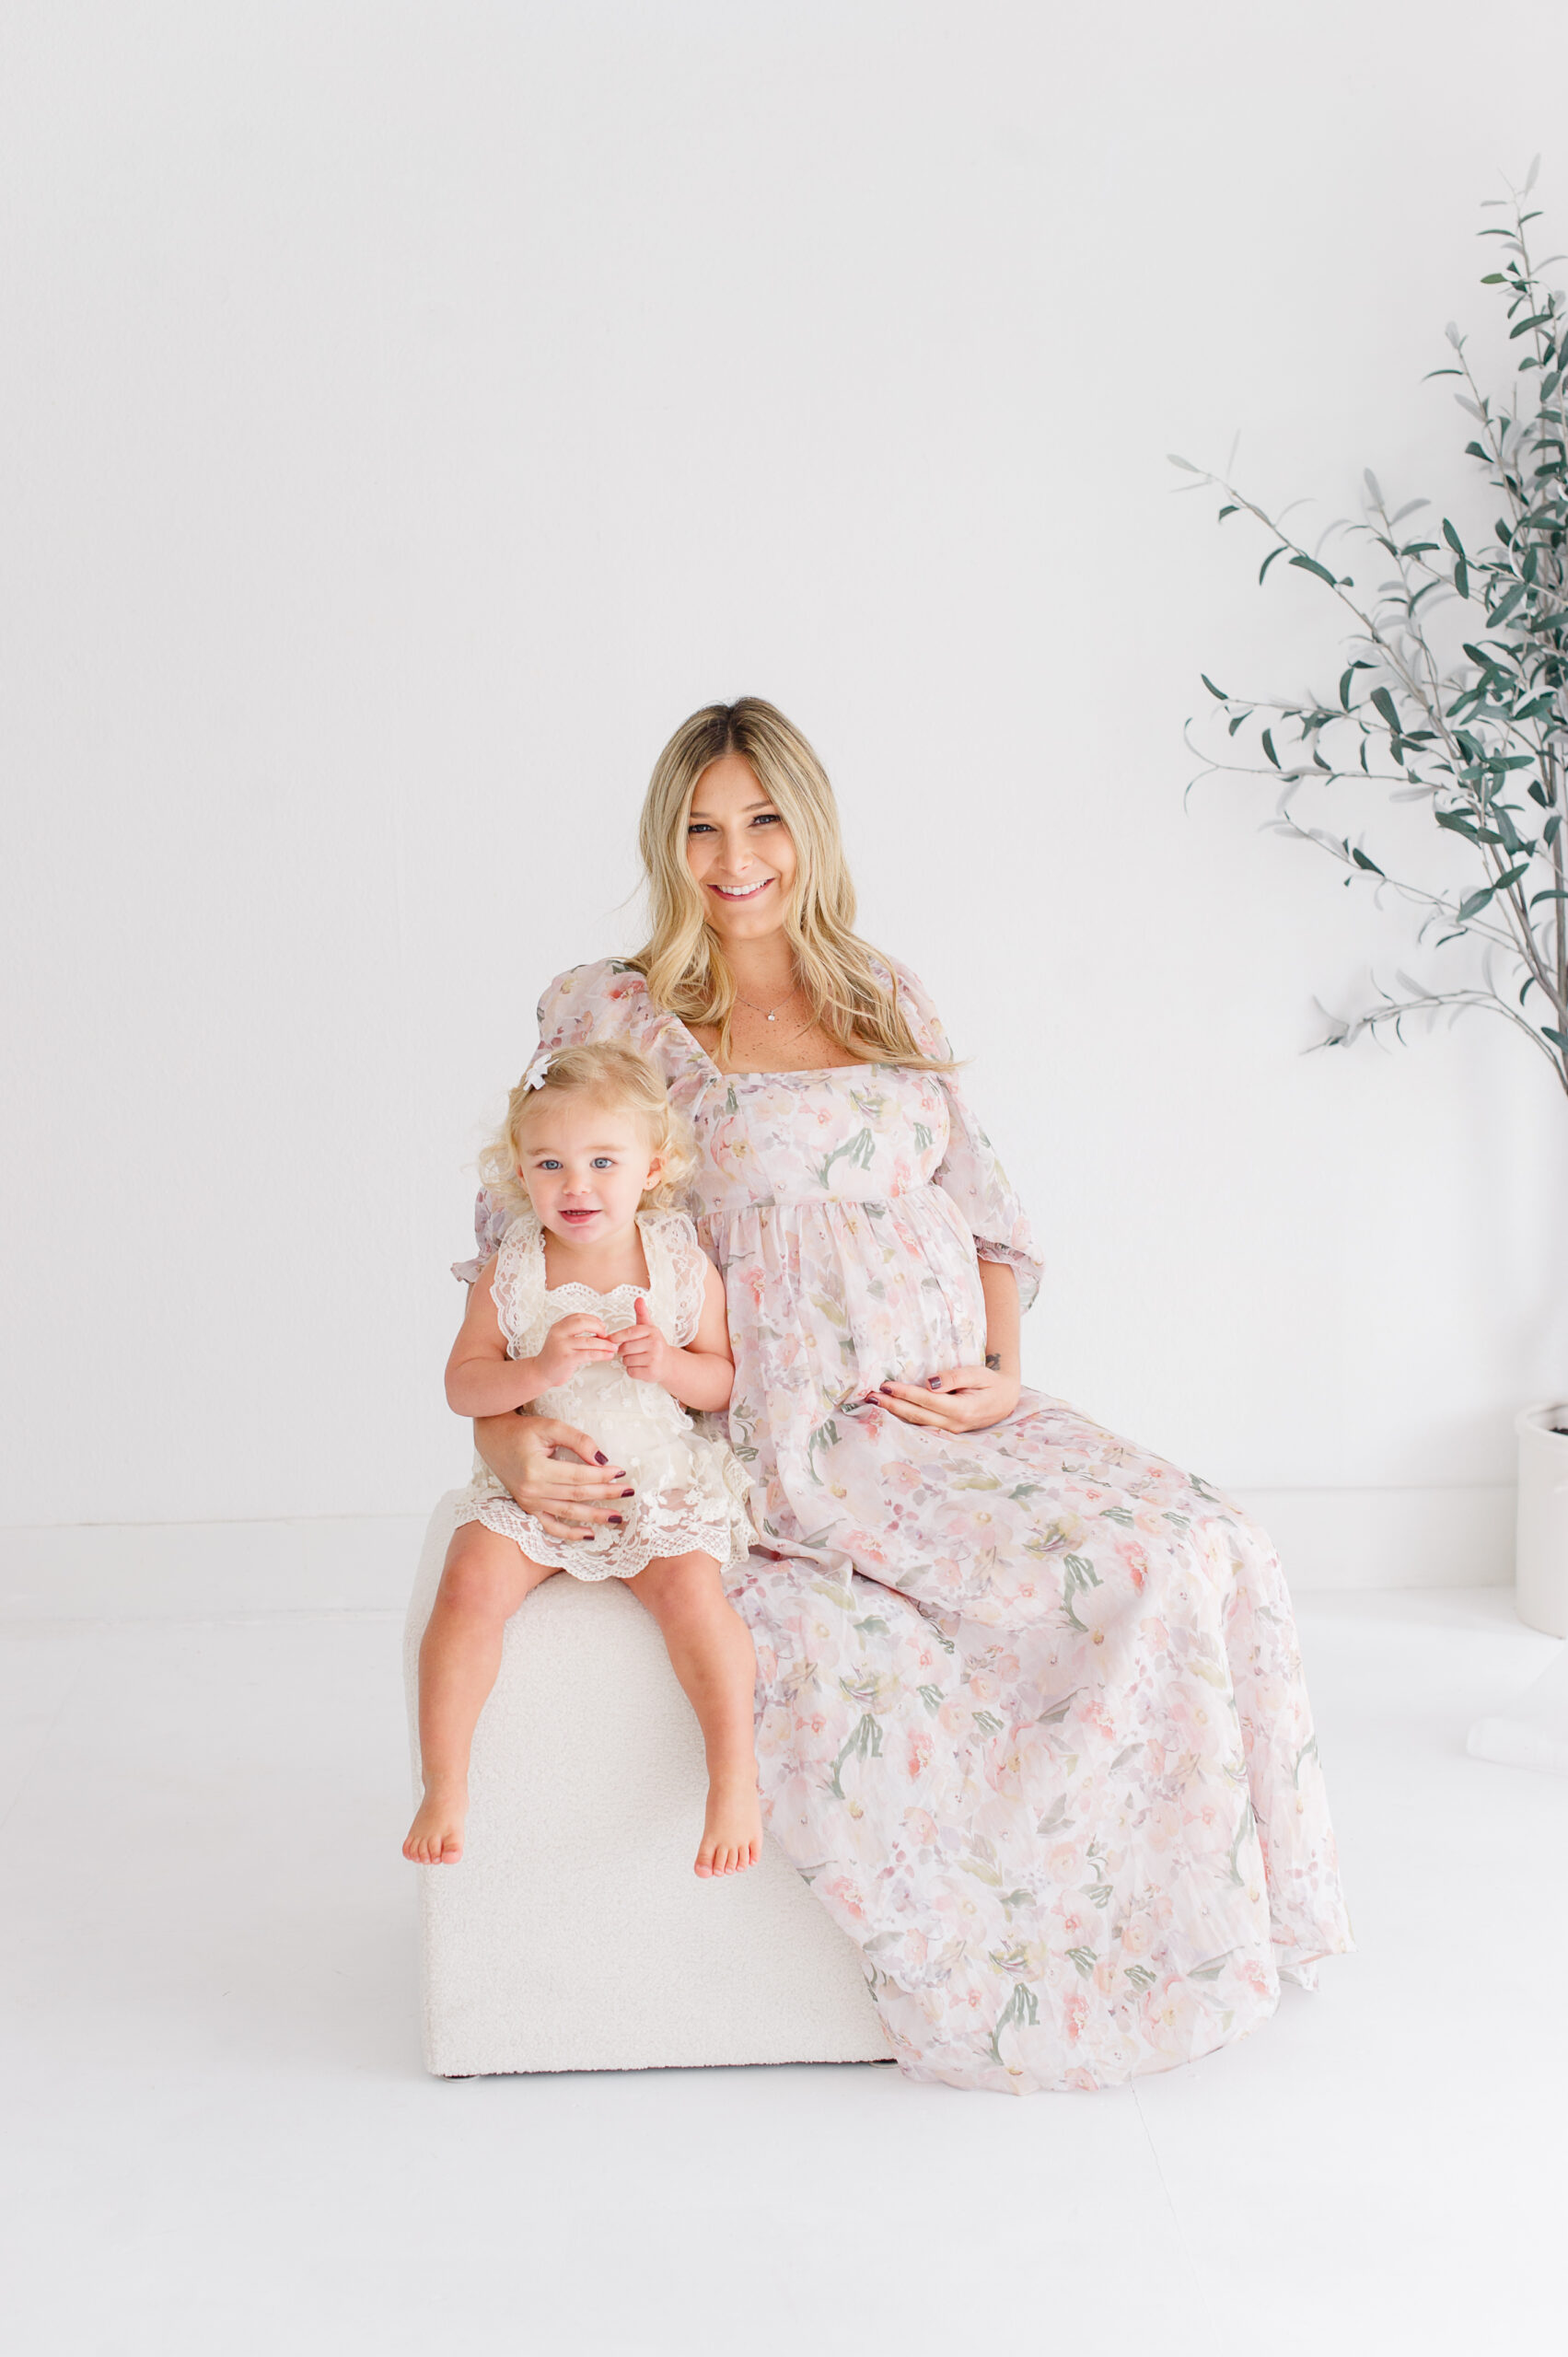 Pregnant mom sitting with her young daughter in a natural light photography studio baby boutiques Orlando